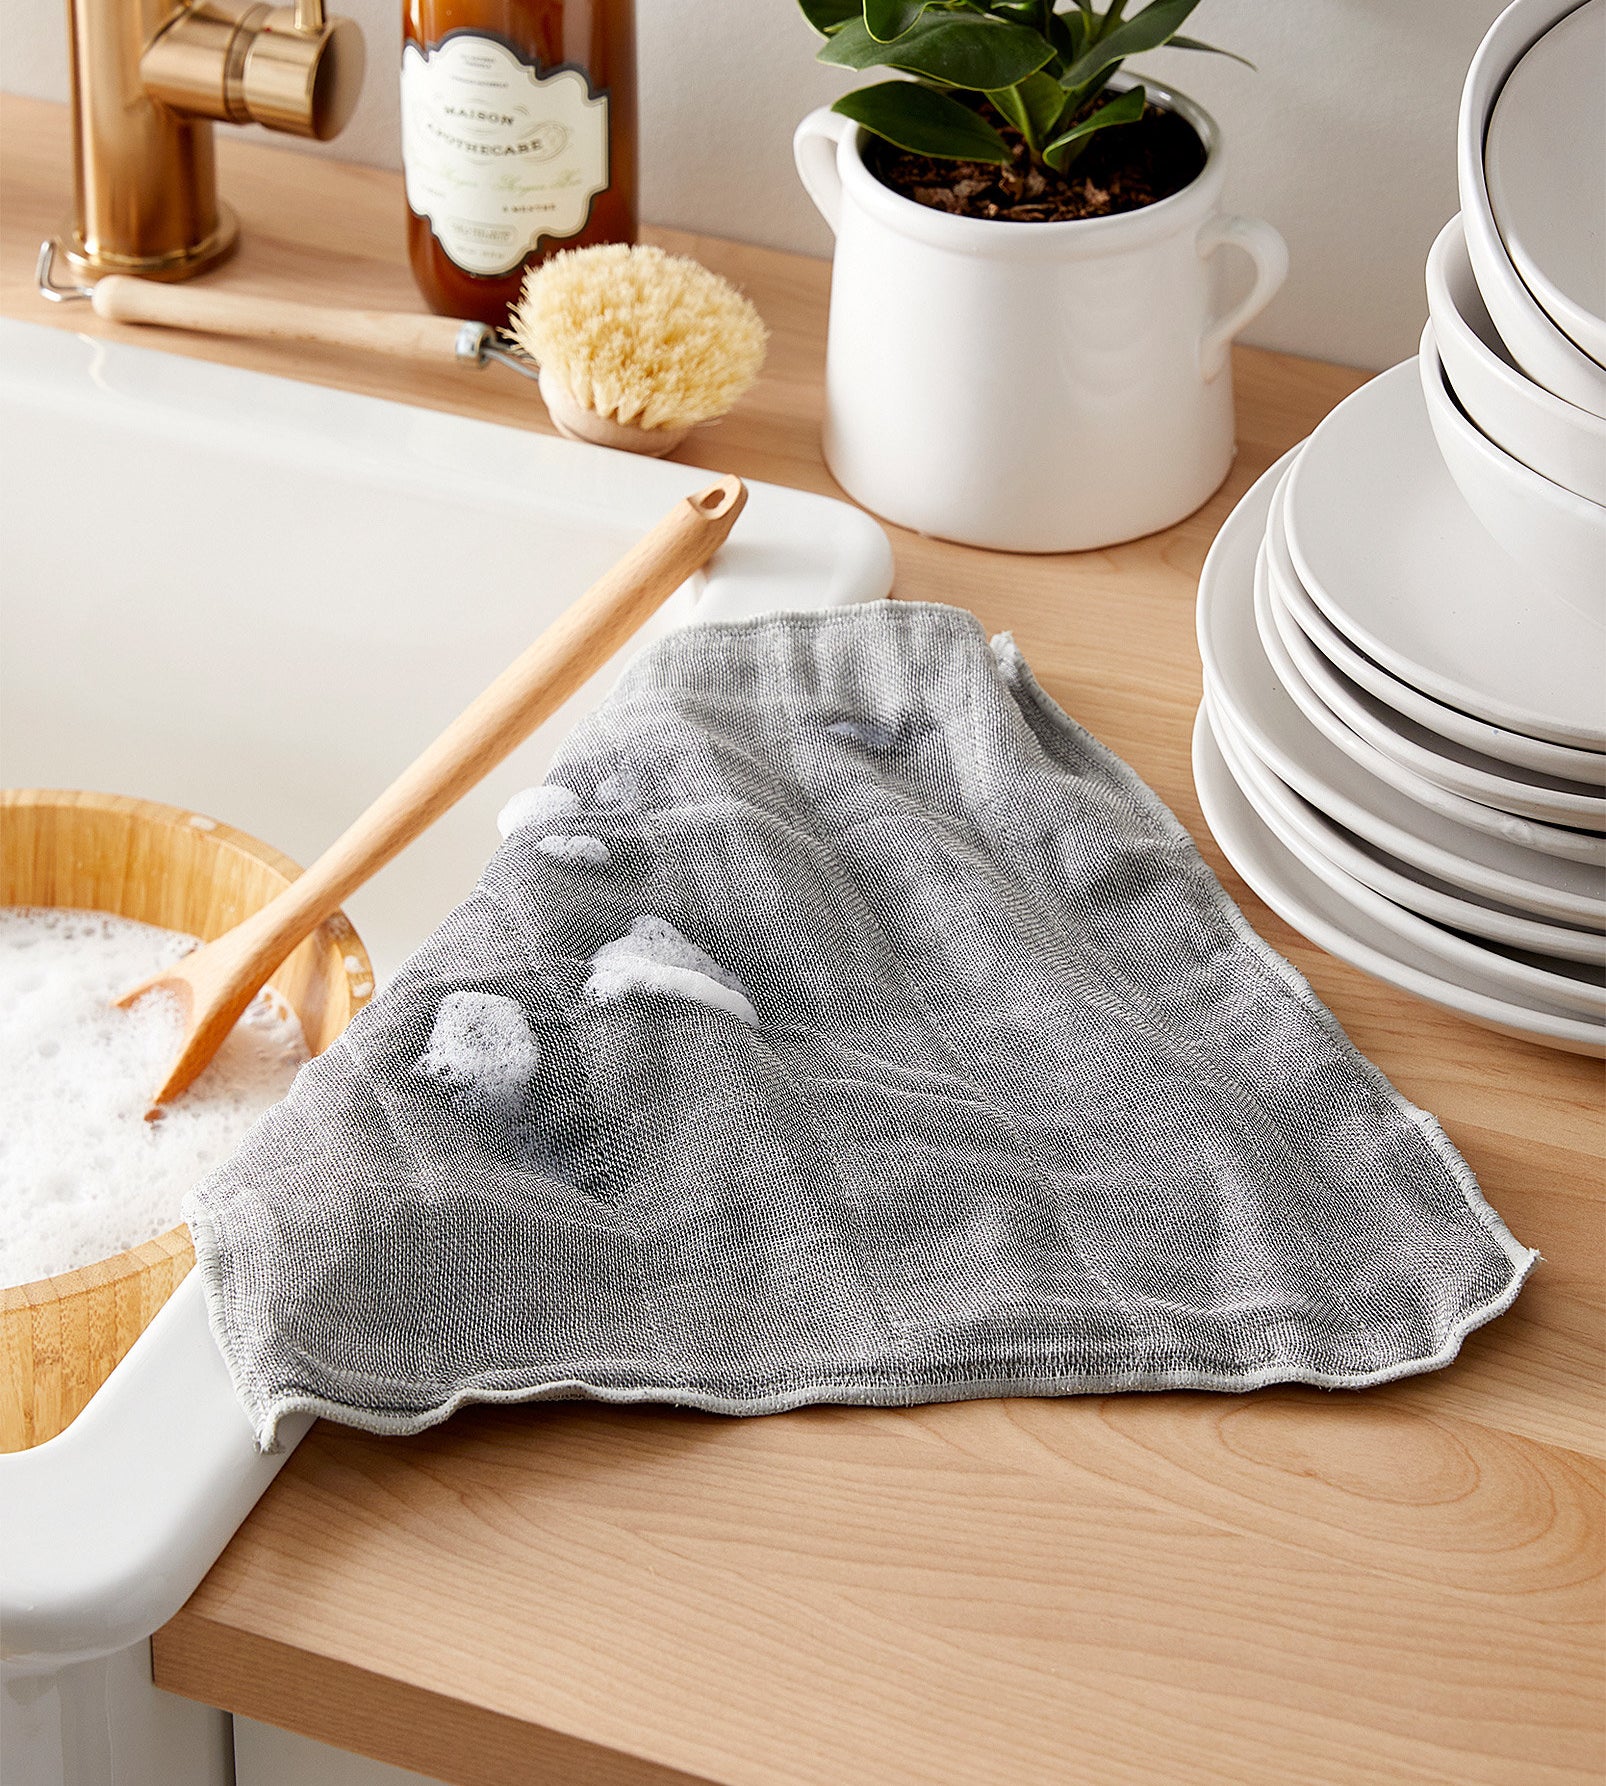 The bamboo-infused cloth next to a soapy dish sink